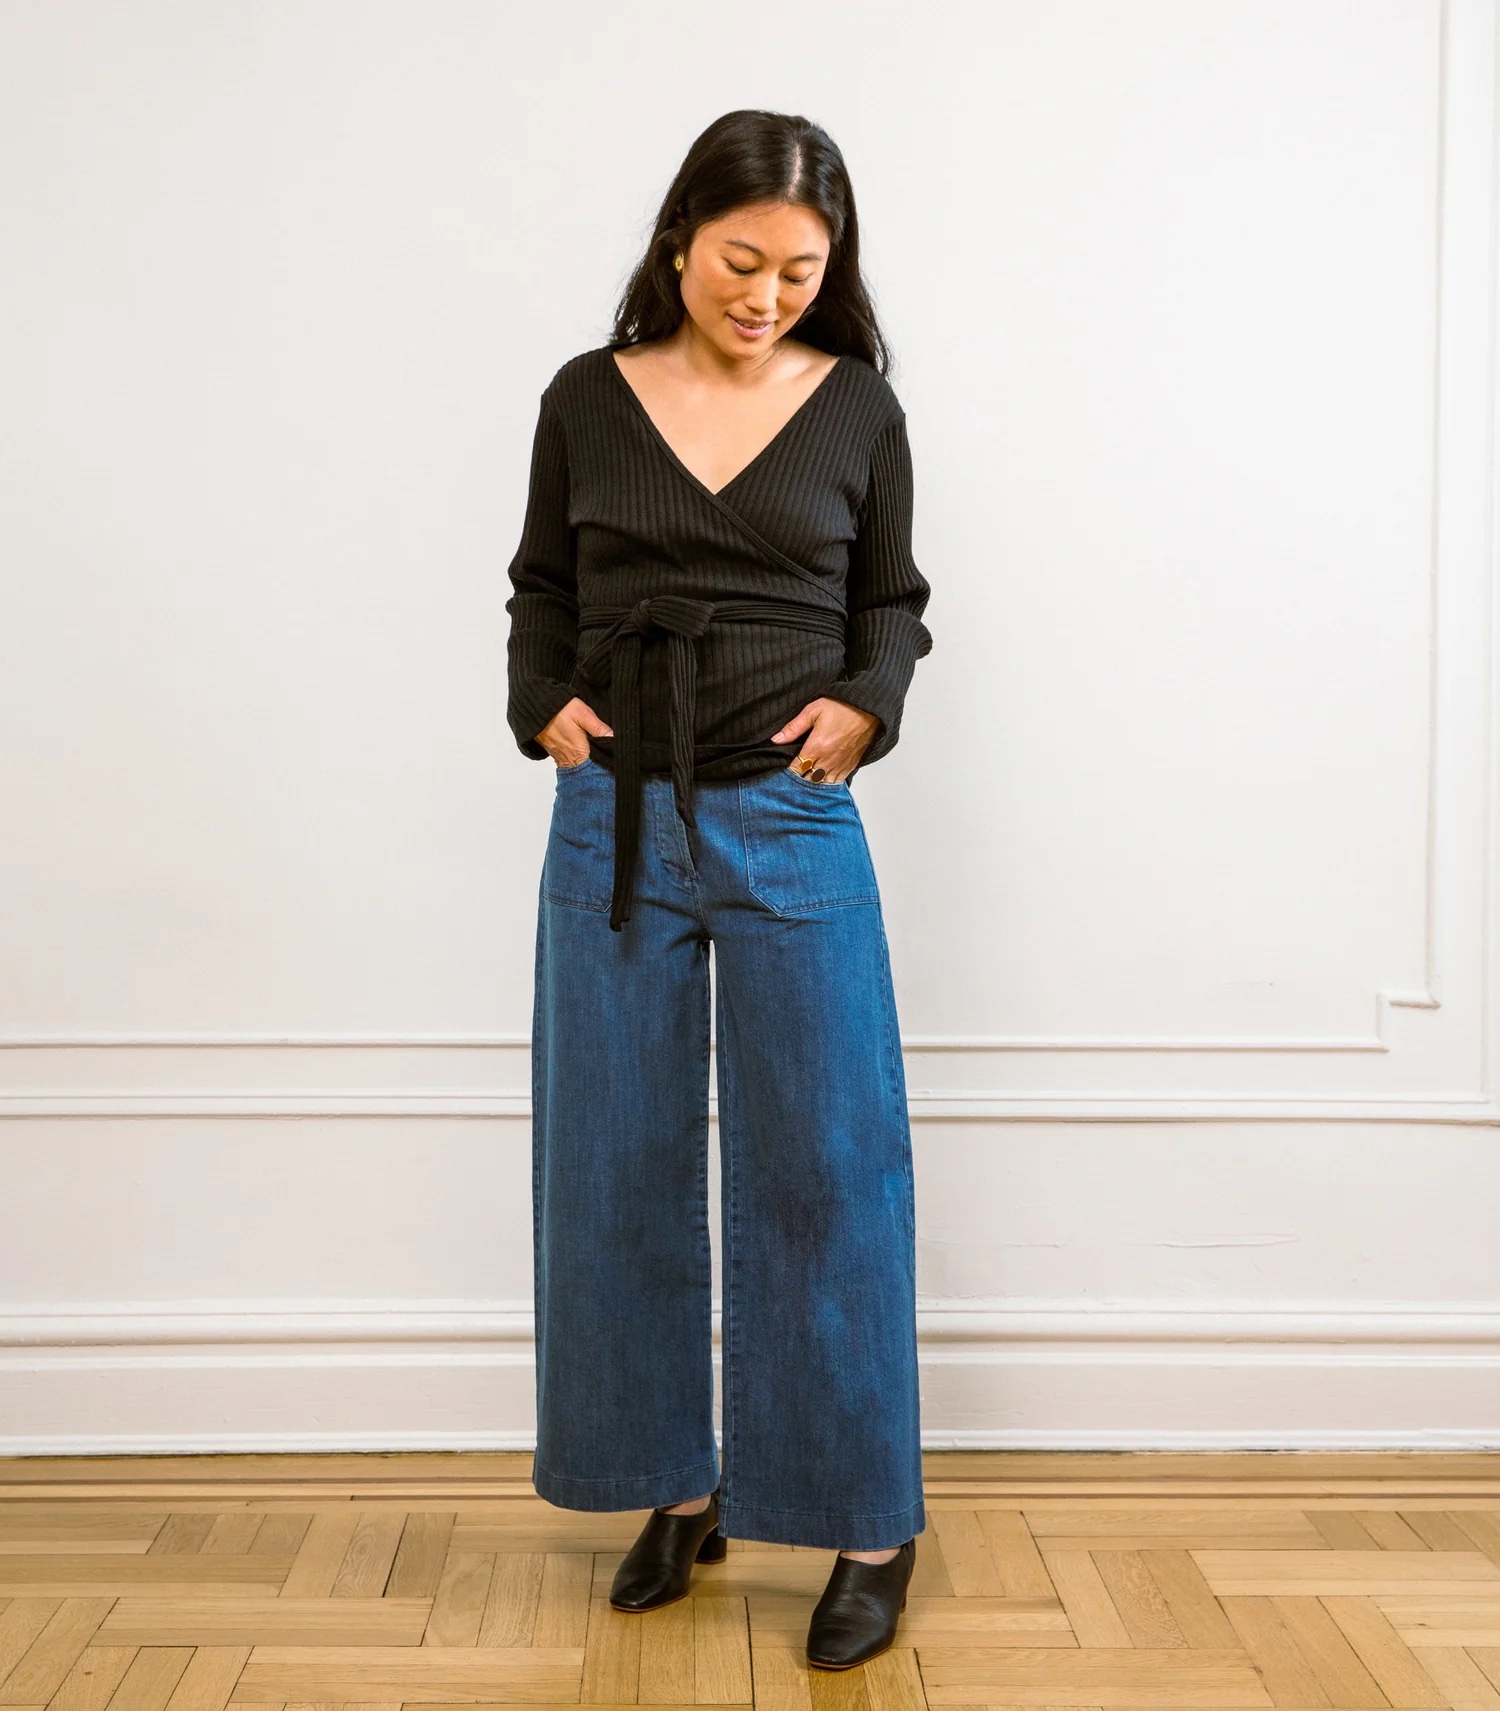 A model in wide leg American-made jeans.